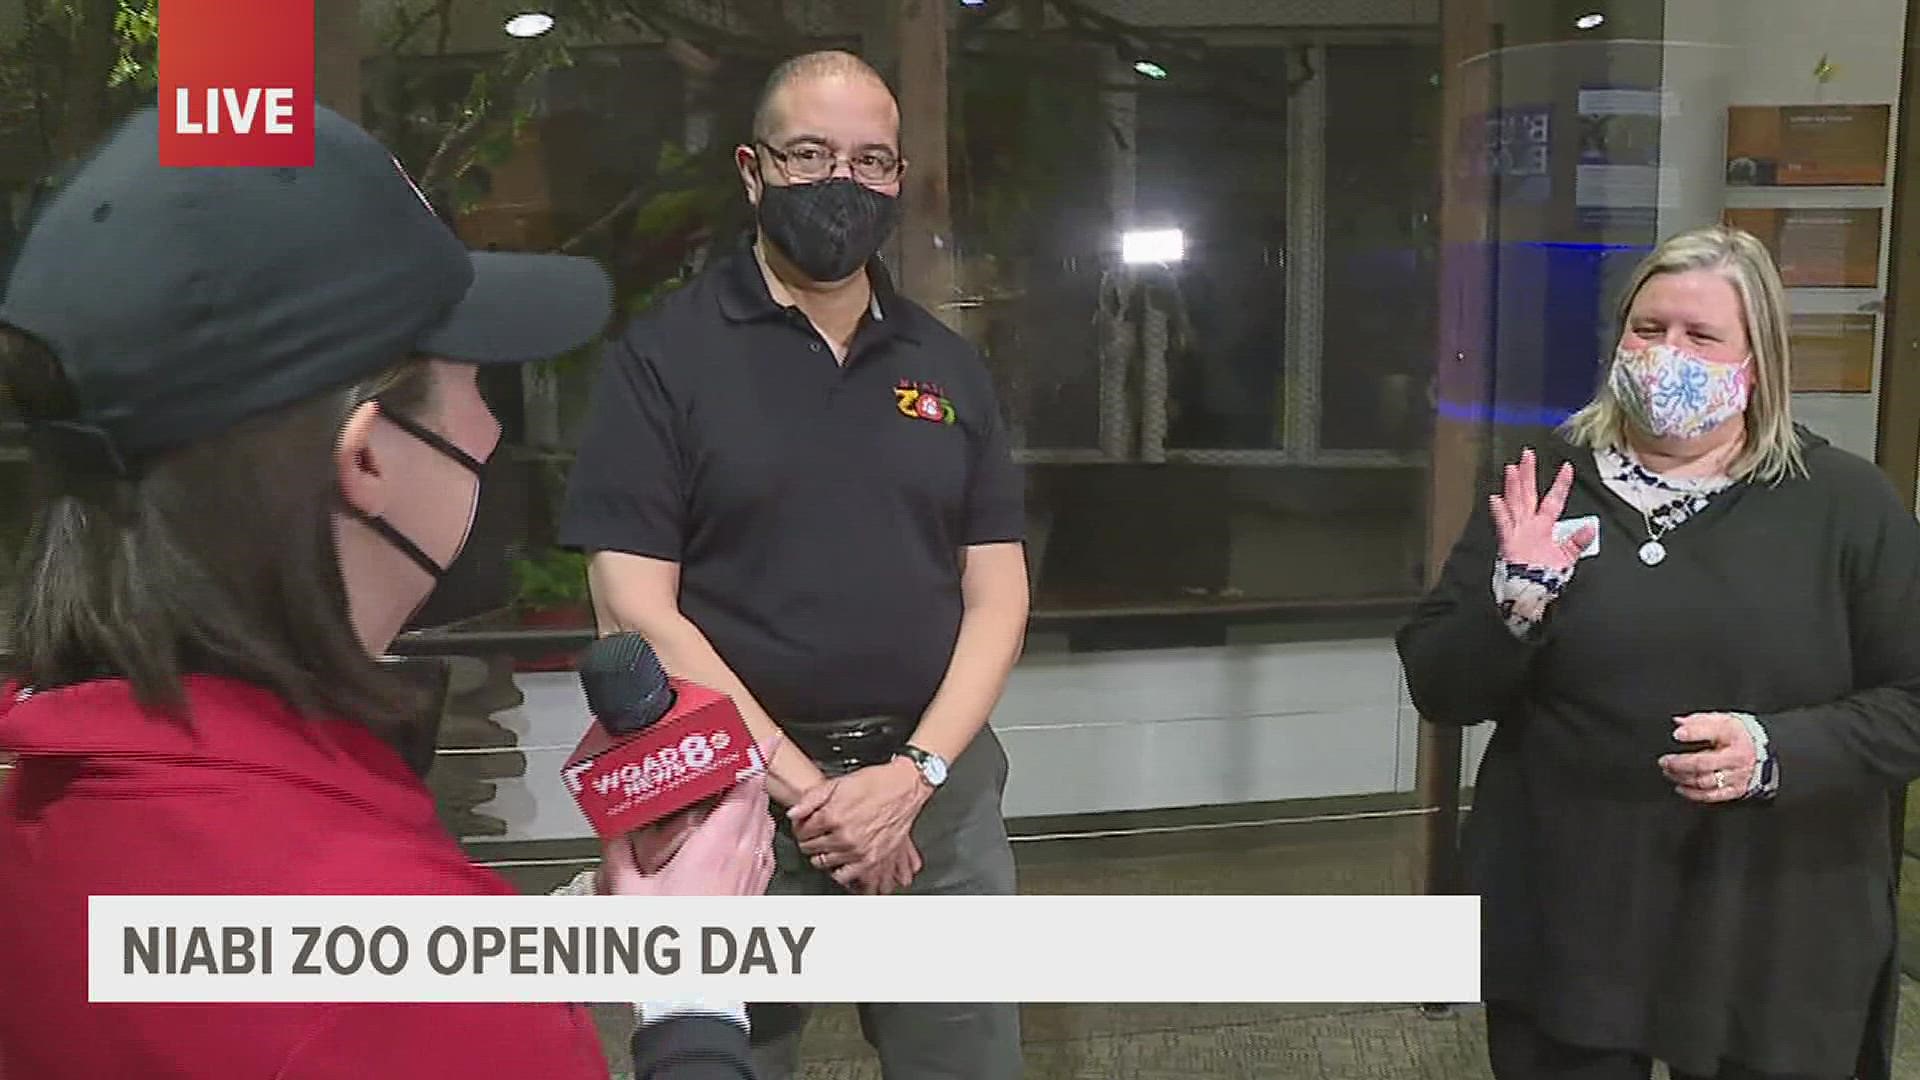 Niabi Zoo Director Lee Jackson and Assistant Zoo Director Tammy Schmidt appeared live on Good Morning Quad Cities for Opening Day - April 18, 2022